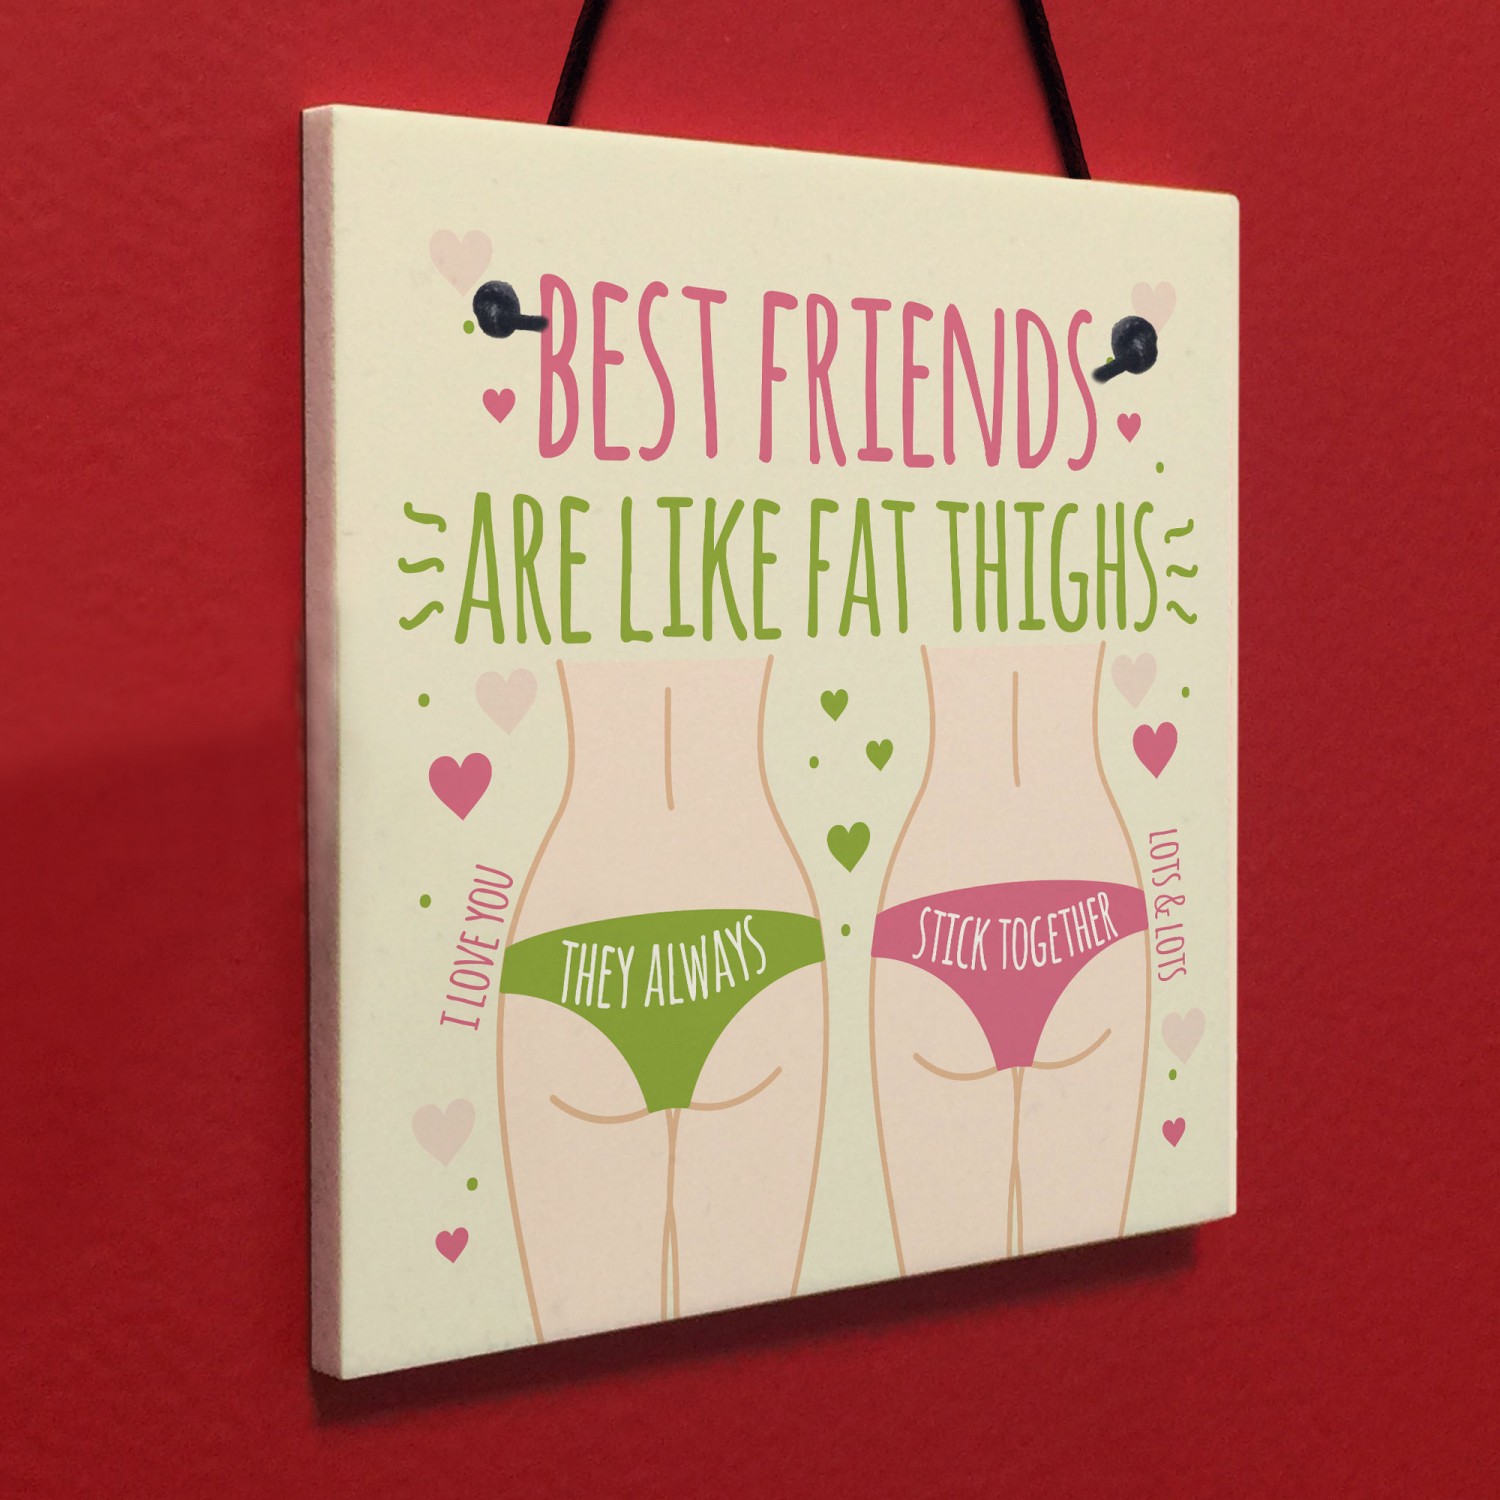 Luxe England Gifts Funny Friend Gifts for Women - Unique Funny Gift Box  Great as Birthday Gifts for Best Friend Woman, Funny Gifts for Friends